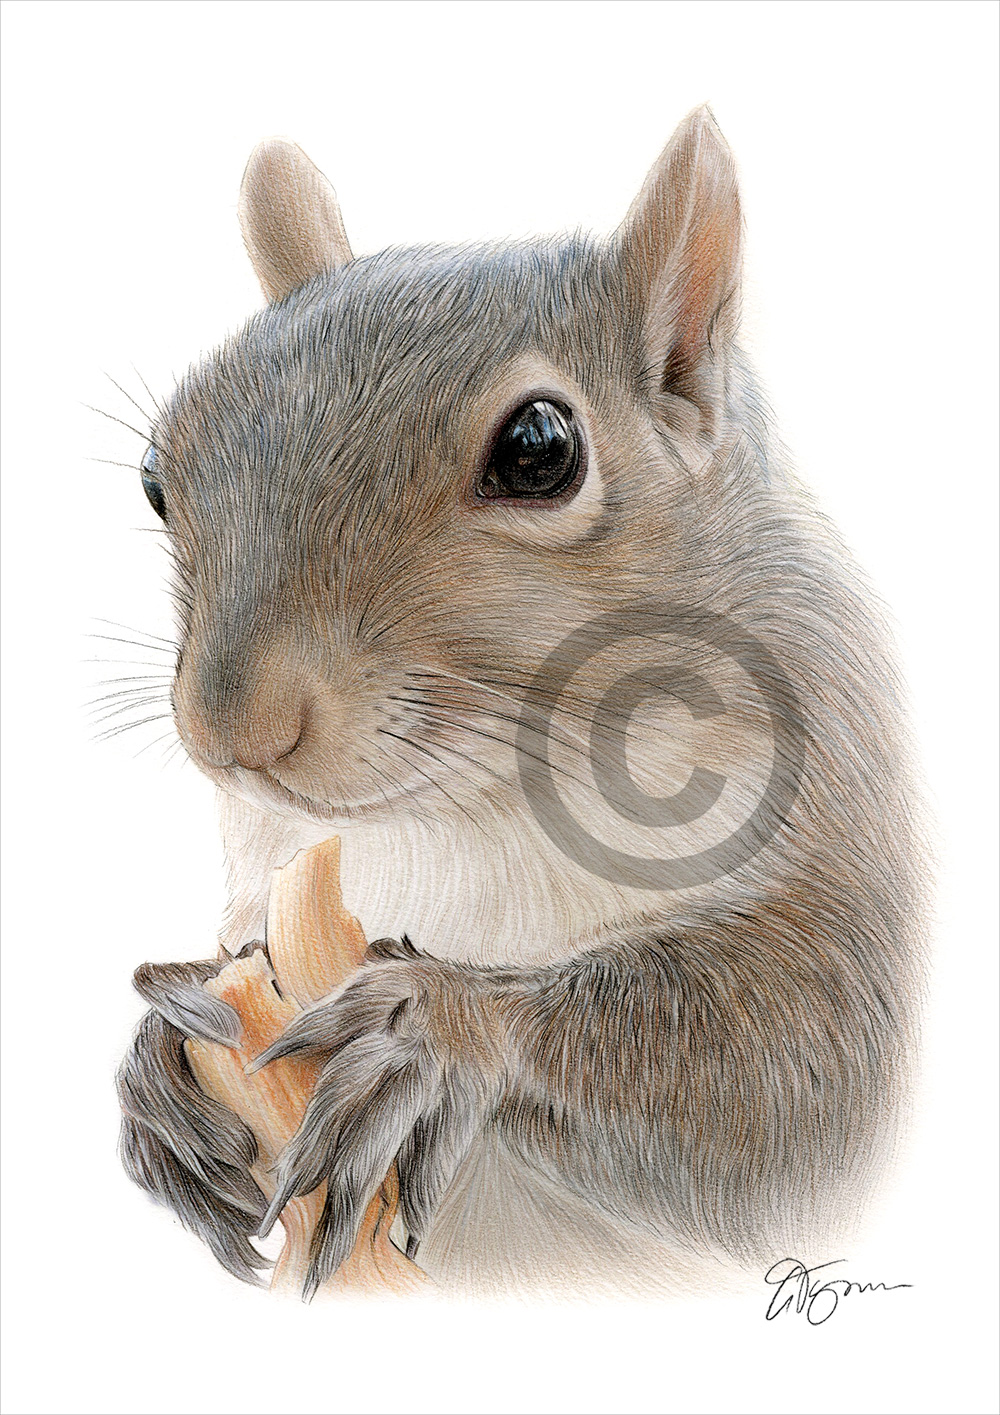 Colour pencil drawing of a squirrel by artist Gary Tymon